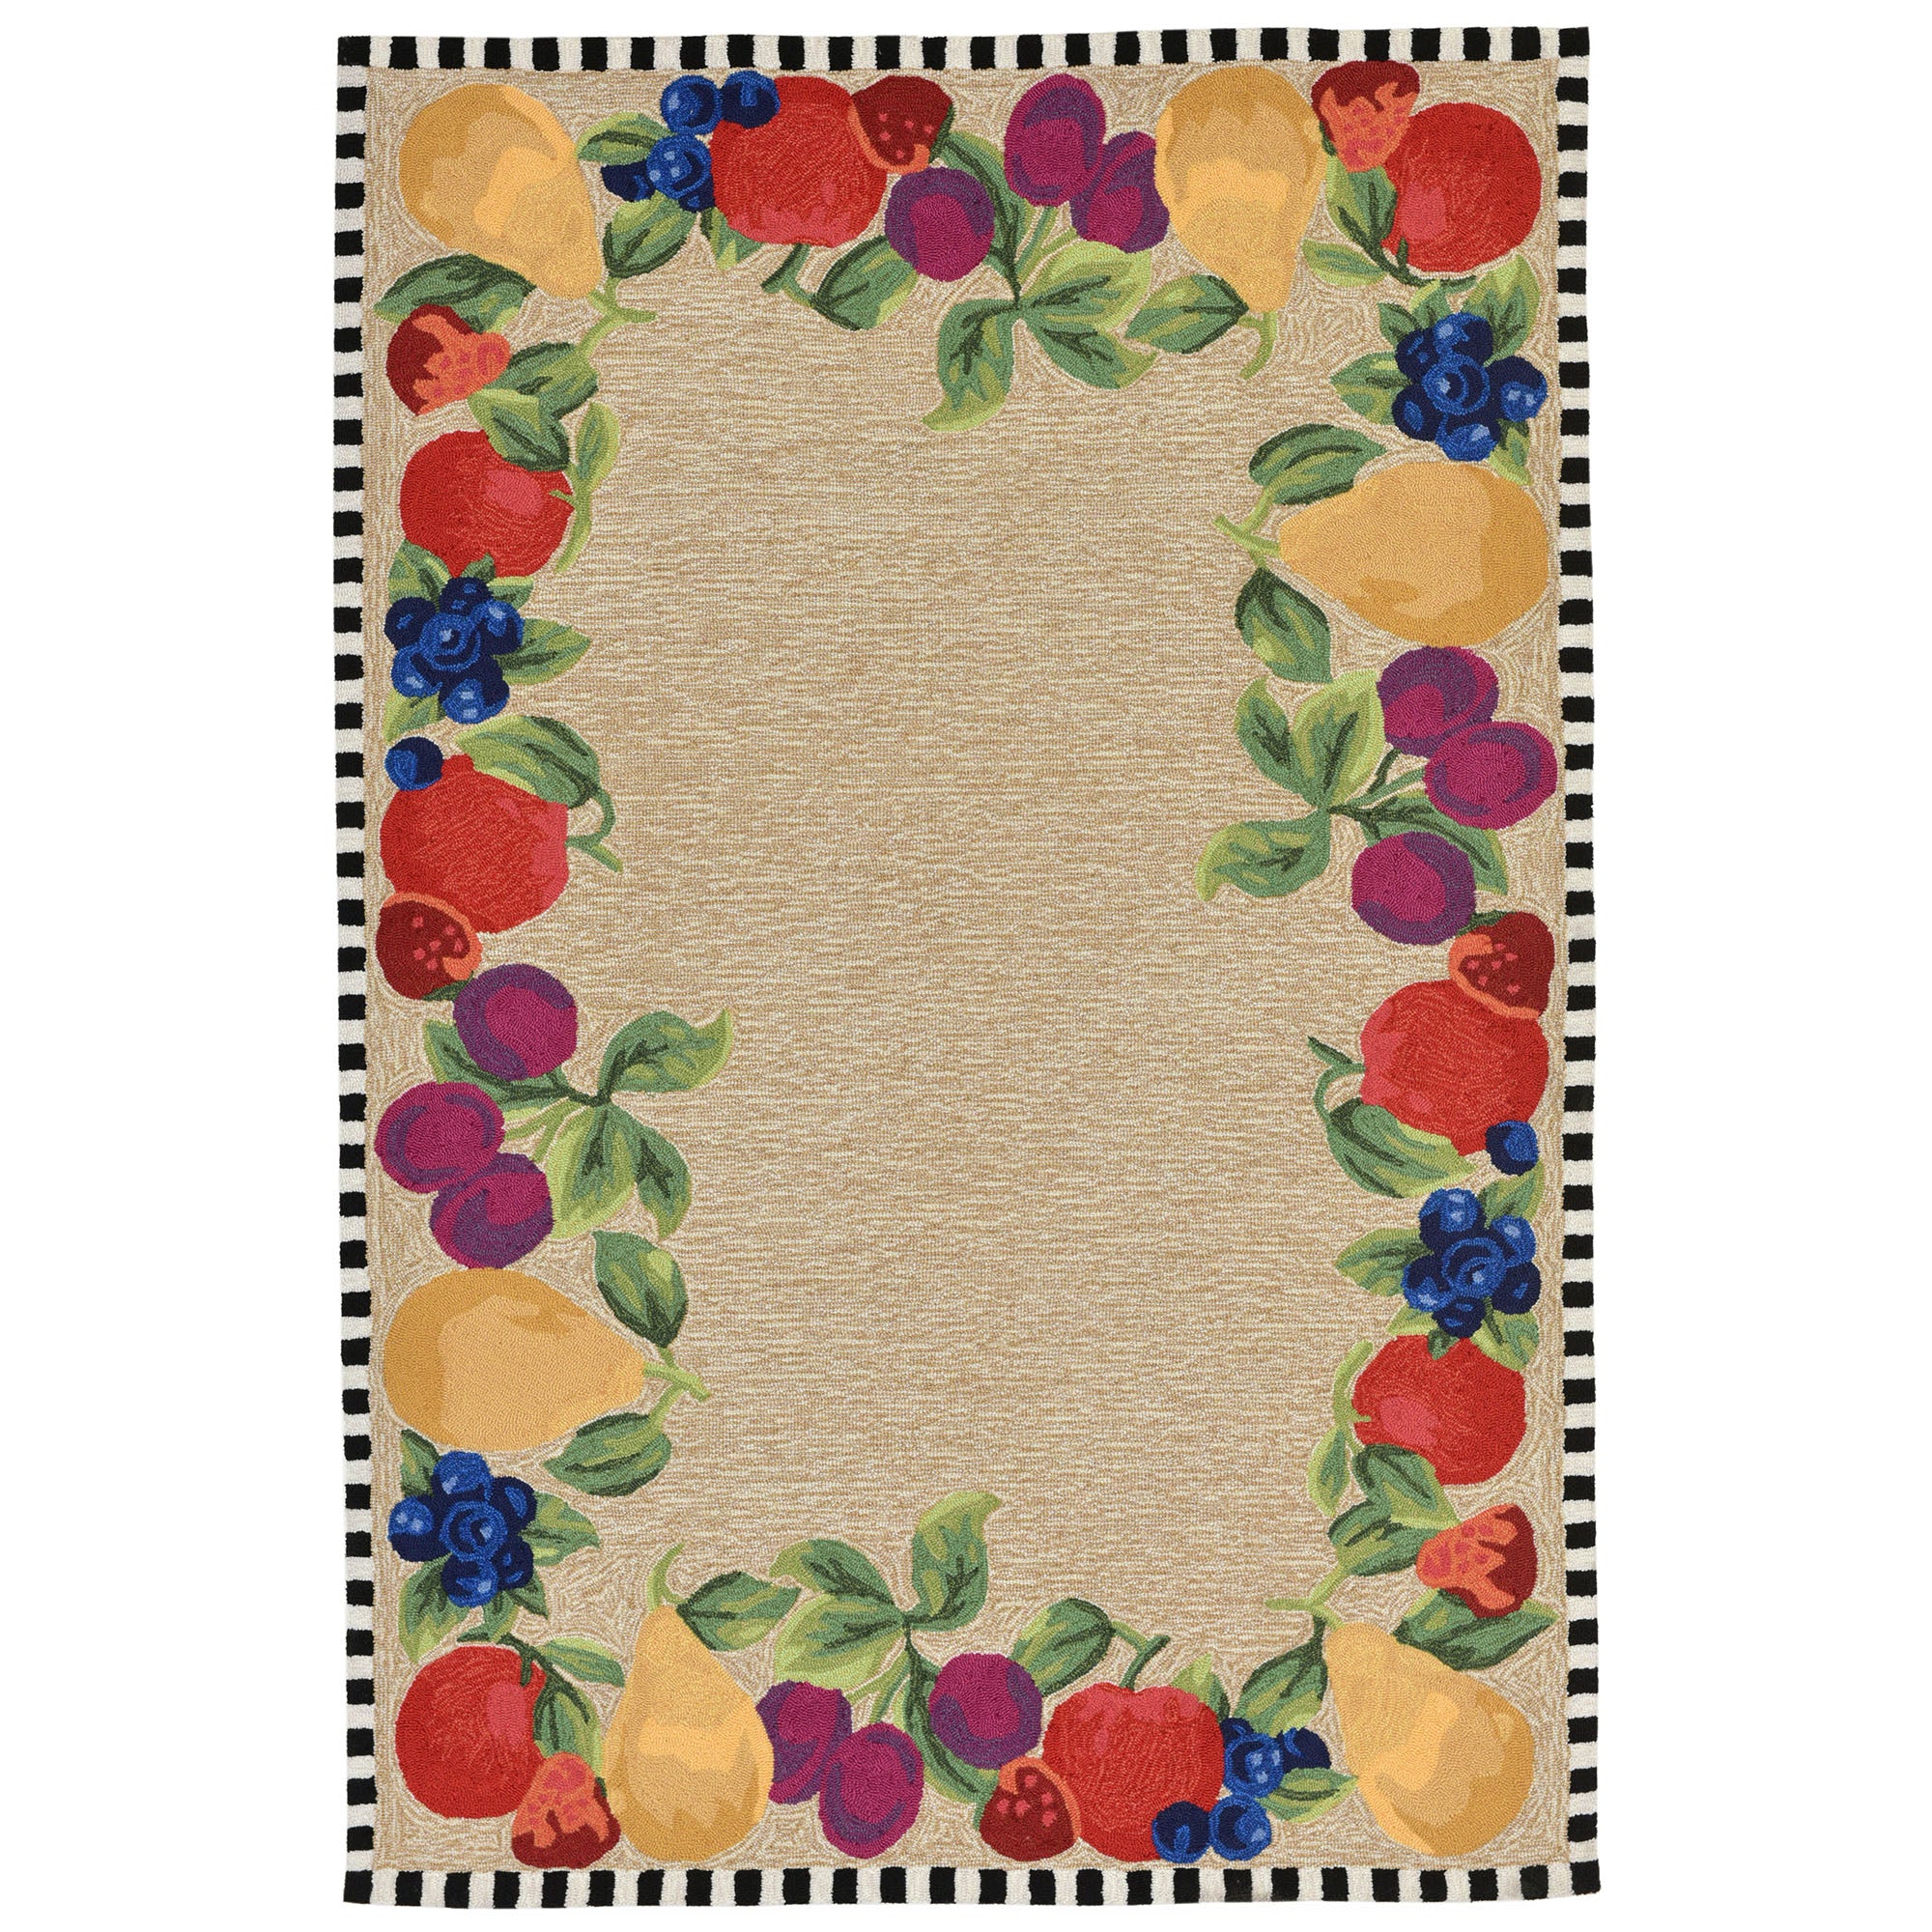 Trans-ocean Imports Ftp46240944 Liora Manne Frontporch Fruits Indoor/outdoor Rug Multi 42"x66"